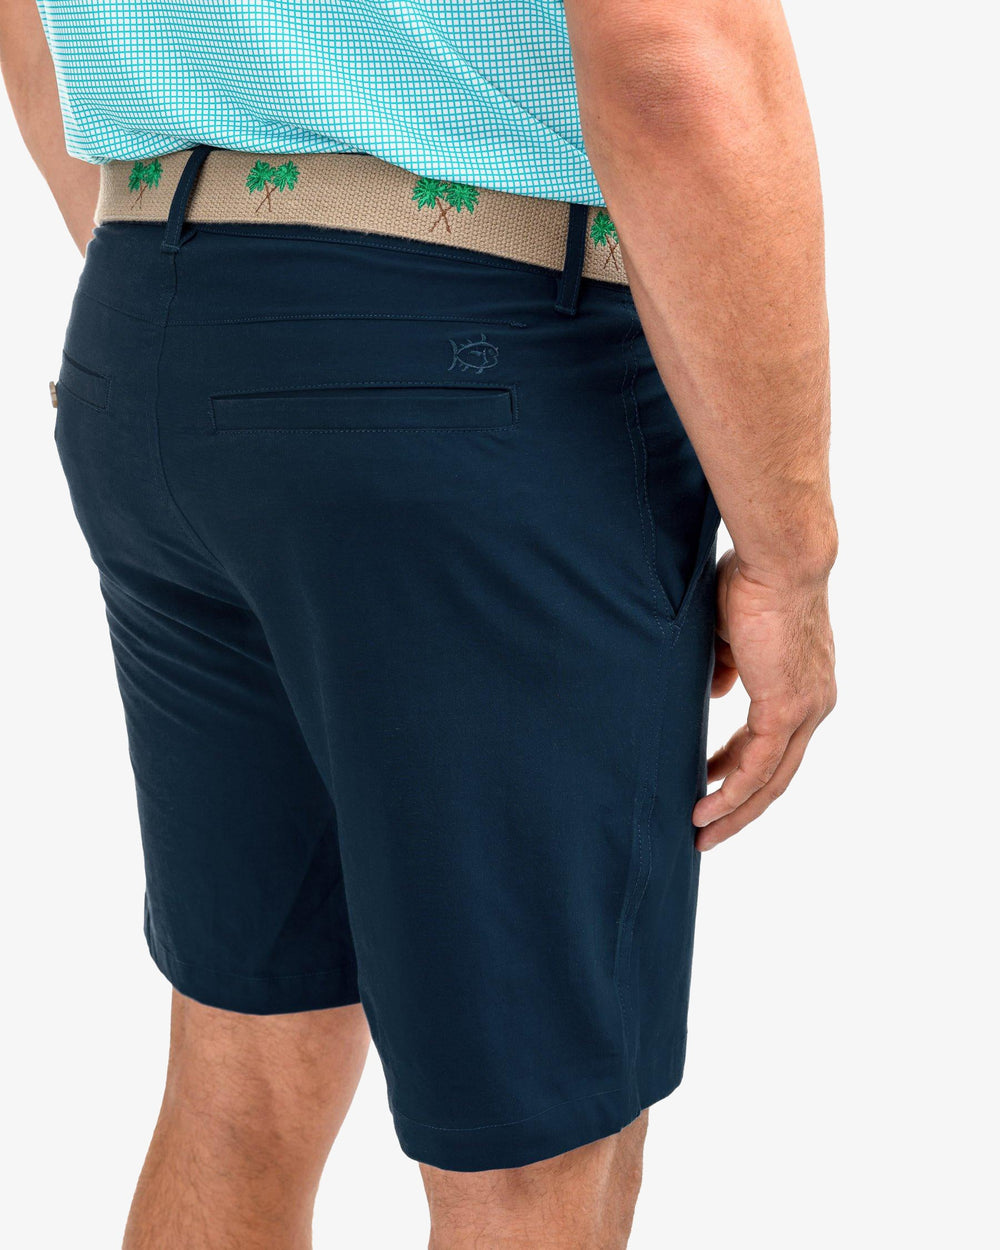 The detail of the Men's T3 Gulf 9 Inch Performance Short by Southern Tide - True Navy